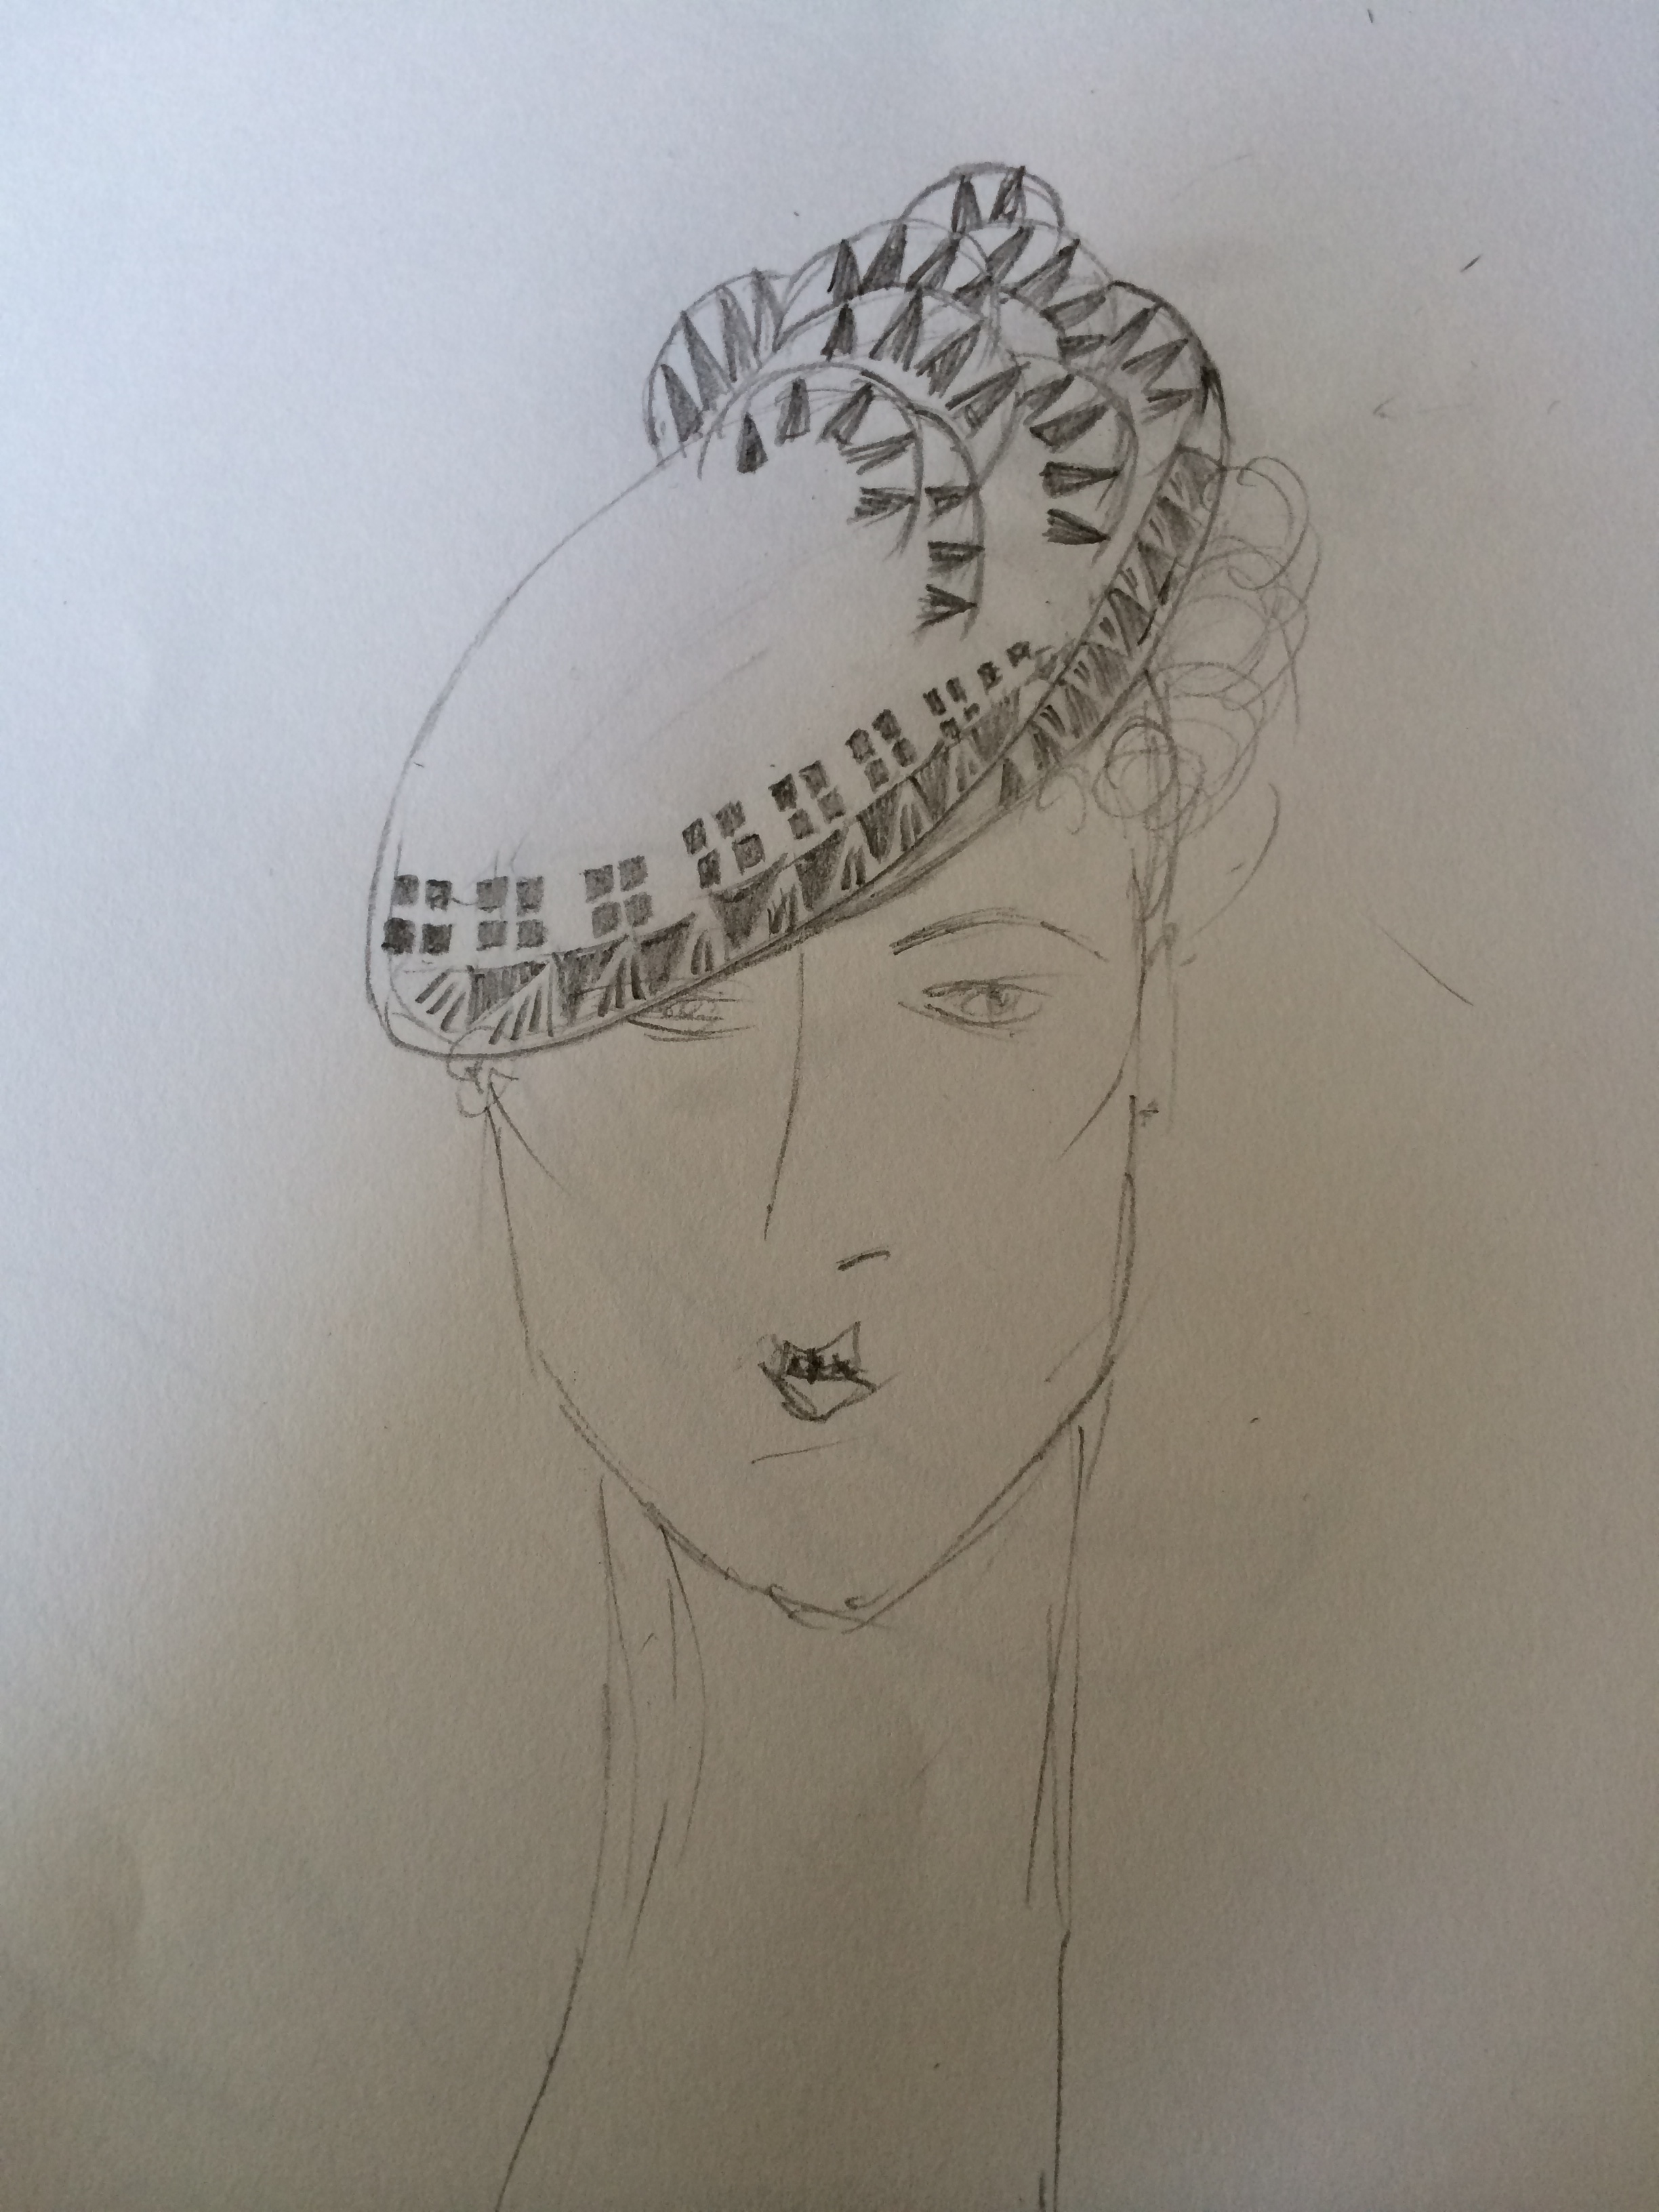 SKETCH...the original drawing of the Chrysler hat, by Boo Paterson